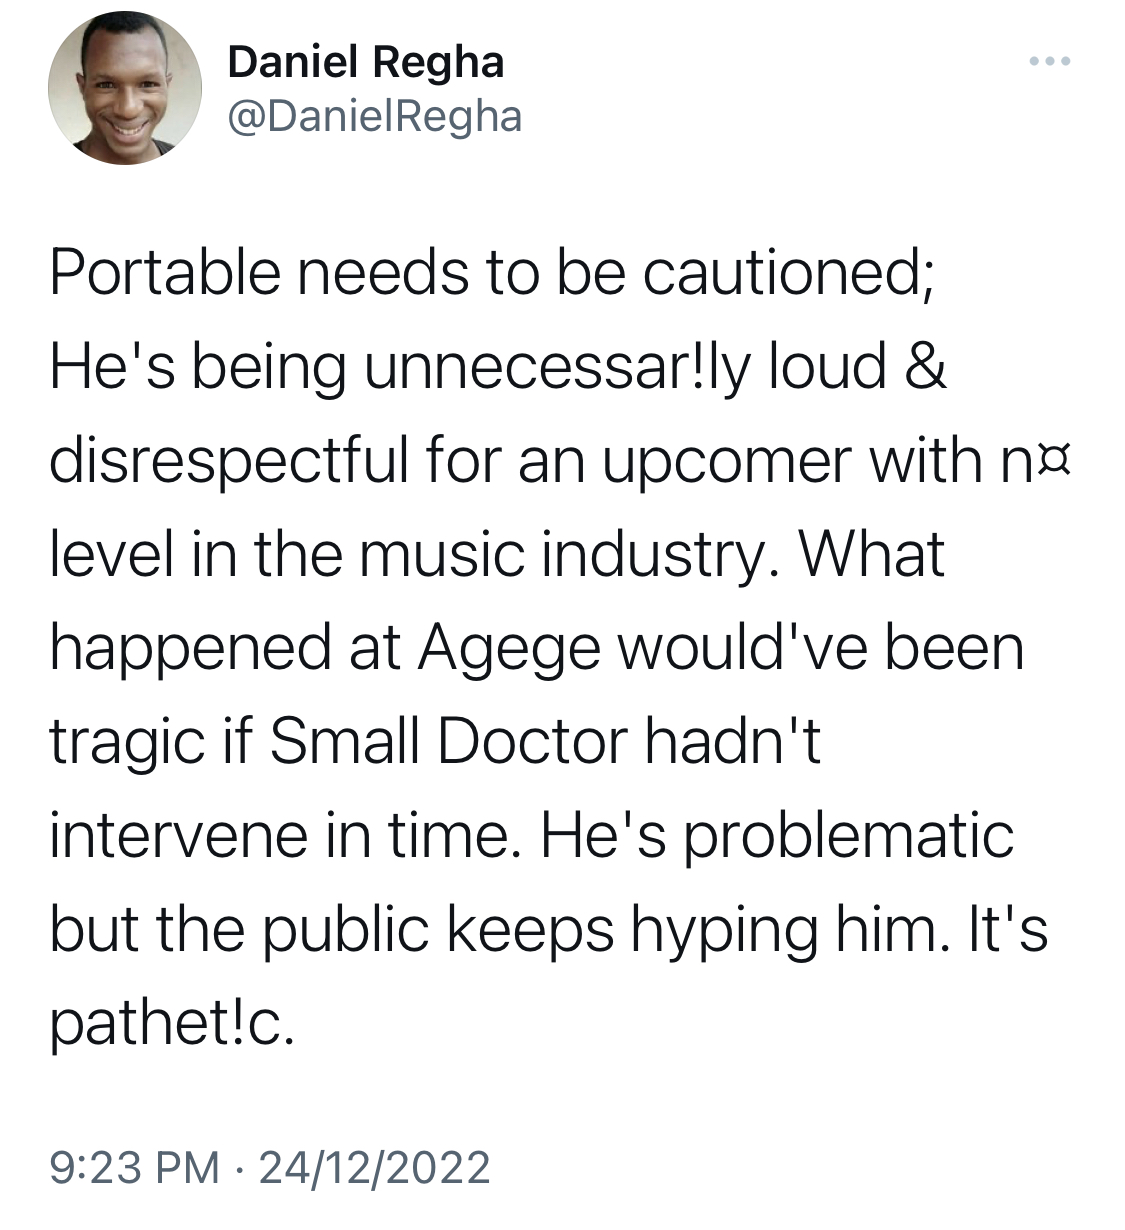 Daniel Regha blasts portable over beef with Small Doctor